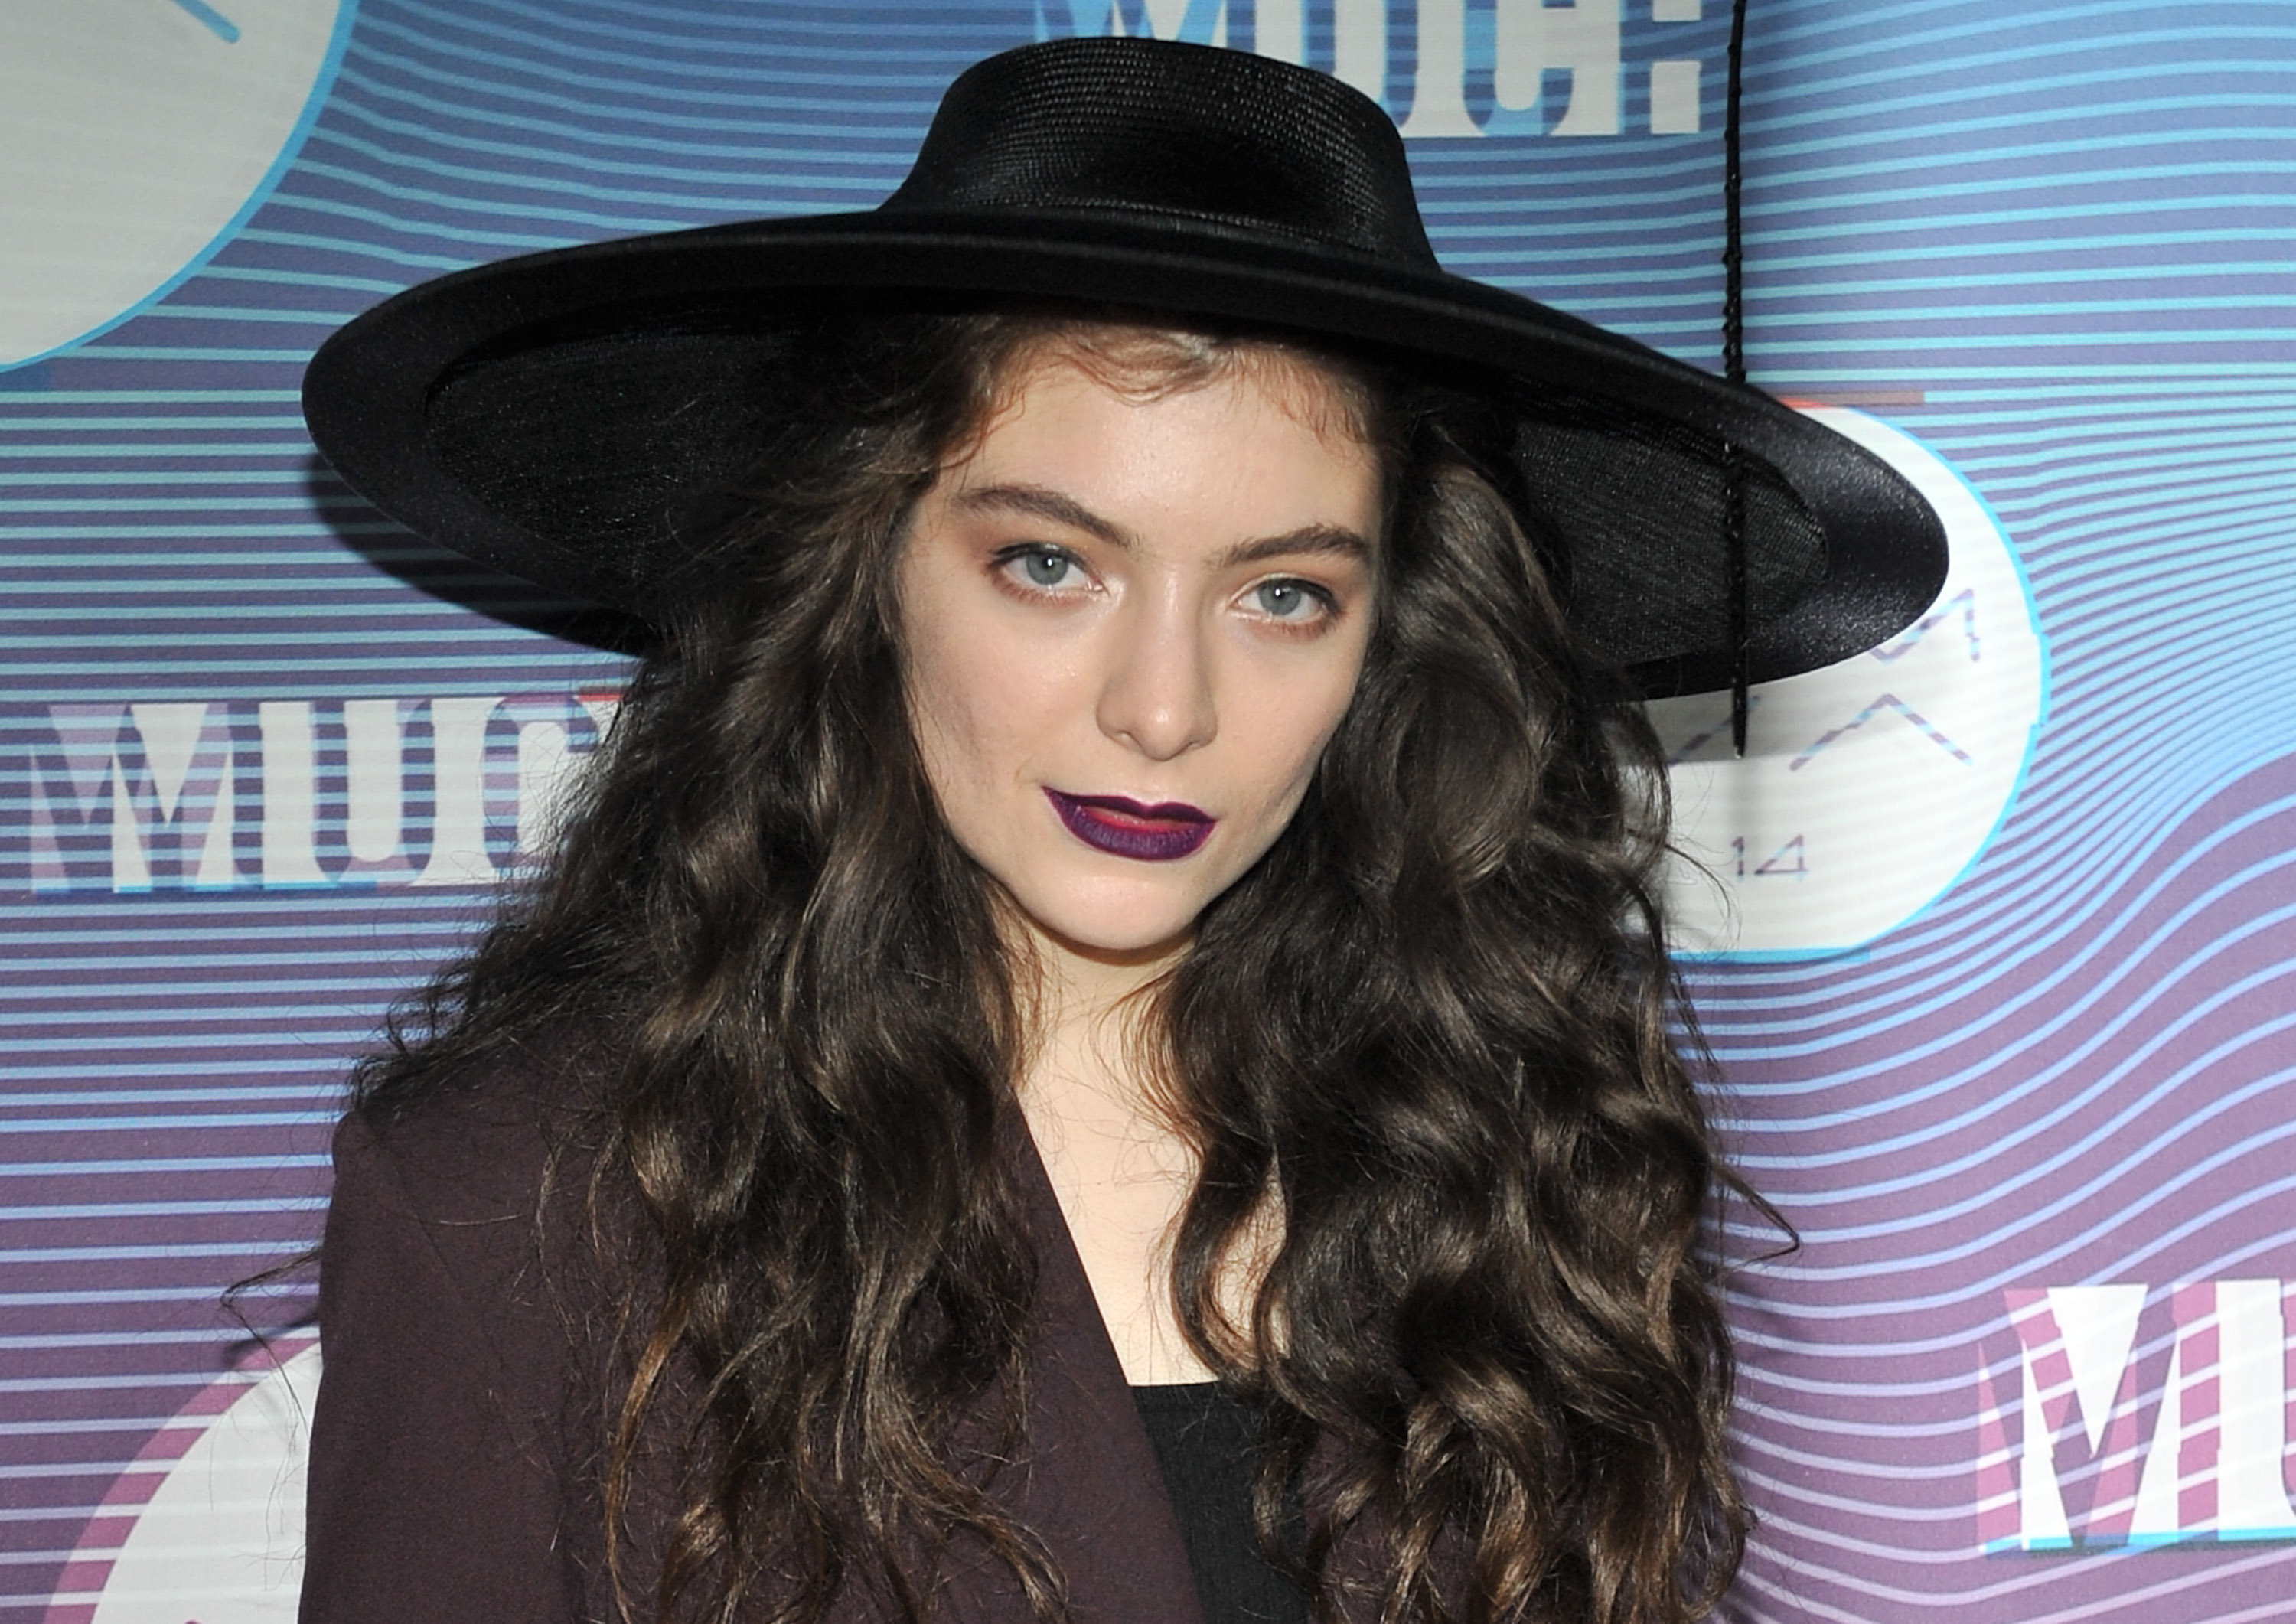 Singer-songwriter Lorde poses in the press room at the 2014 MuchMusic Video Awards at MuchMusic HQ (Sonia Recchia&mdash;Getty Images)